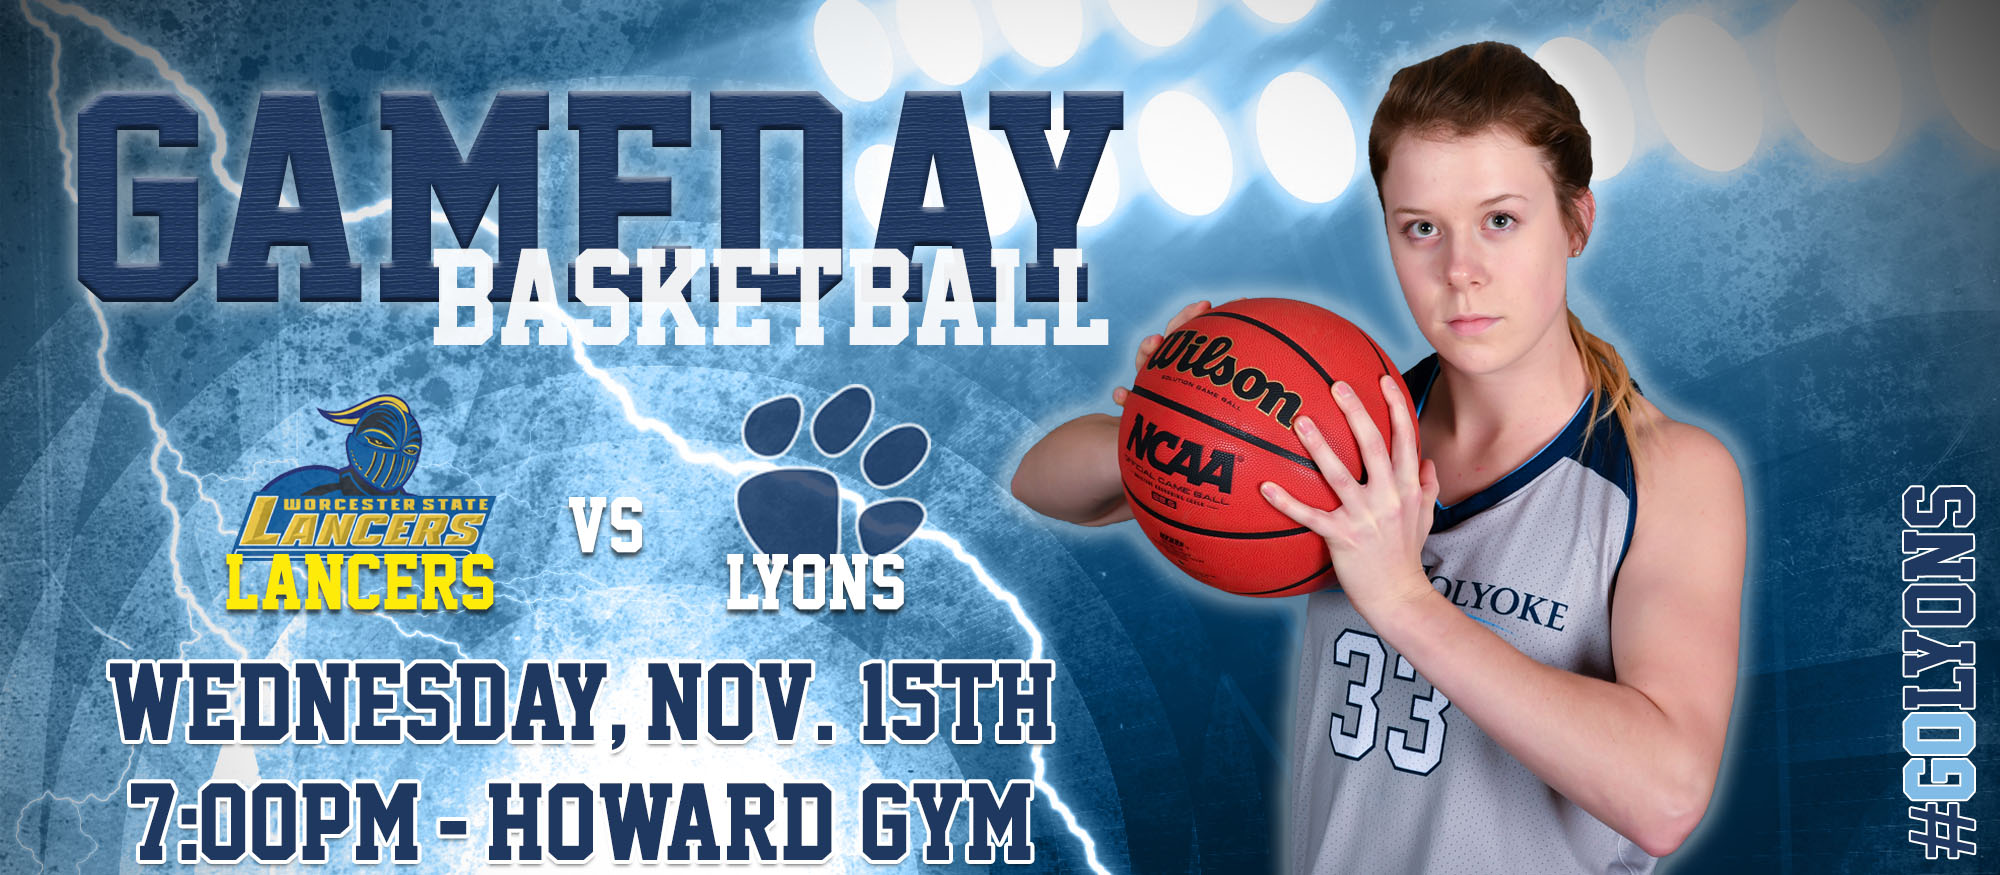 Gameday promotion image featuring Lyons basketball player, Michaela Butin. Promotes the November 15th season opener at home against Worcester State at 7pm for the MHC Basketball team.